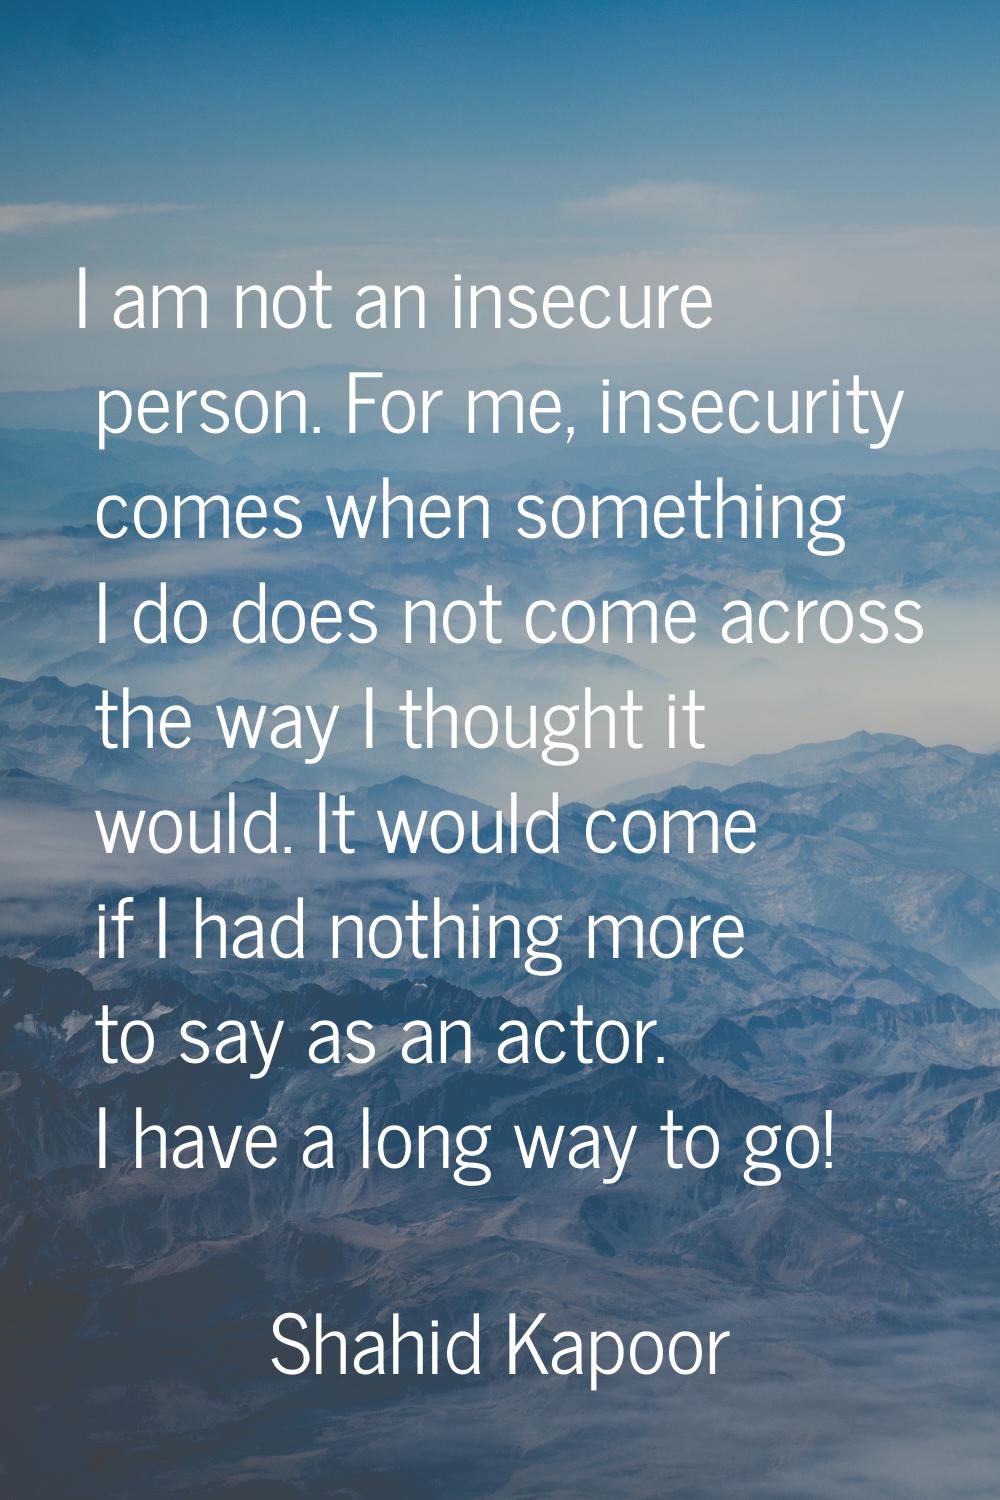 I am not an insecure person. For me, insecurity comes when something I do does not come across the 